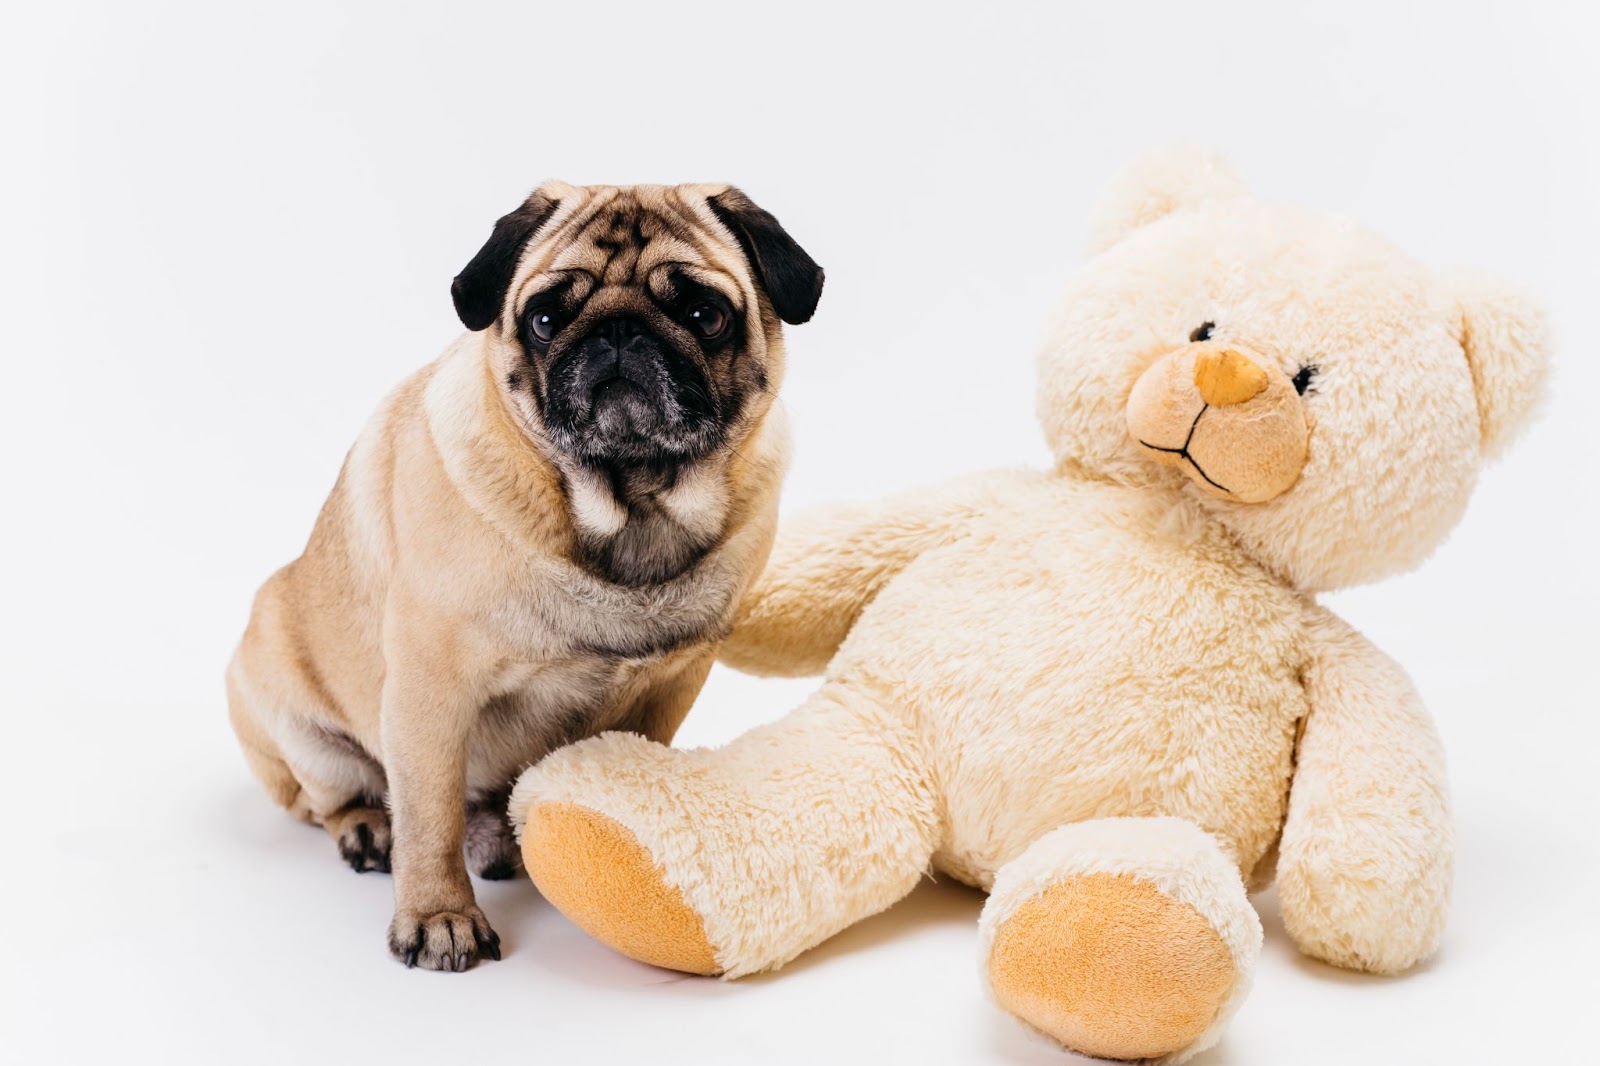 A cute dog looks into the camera with a big teddy bear next to him